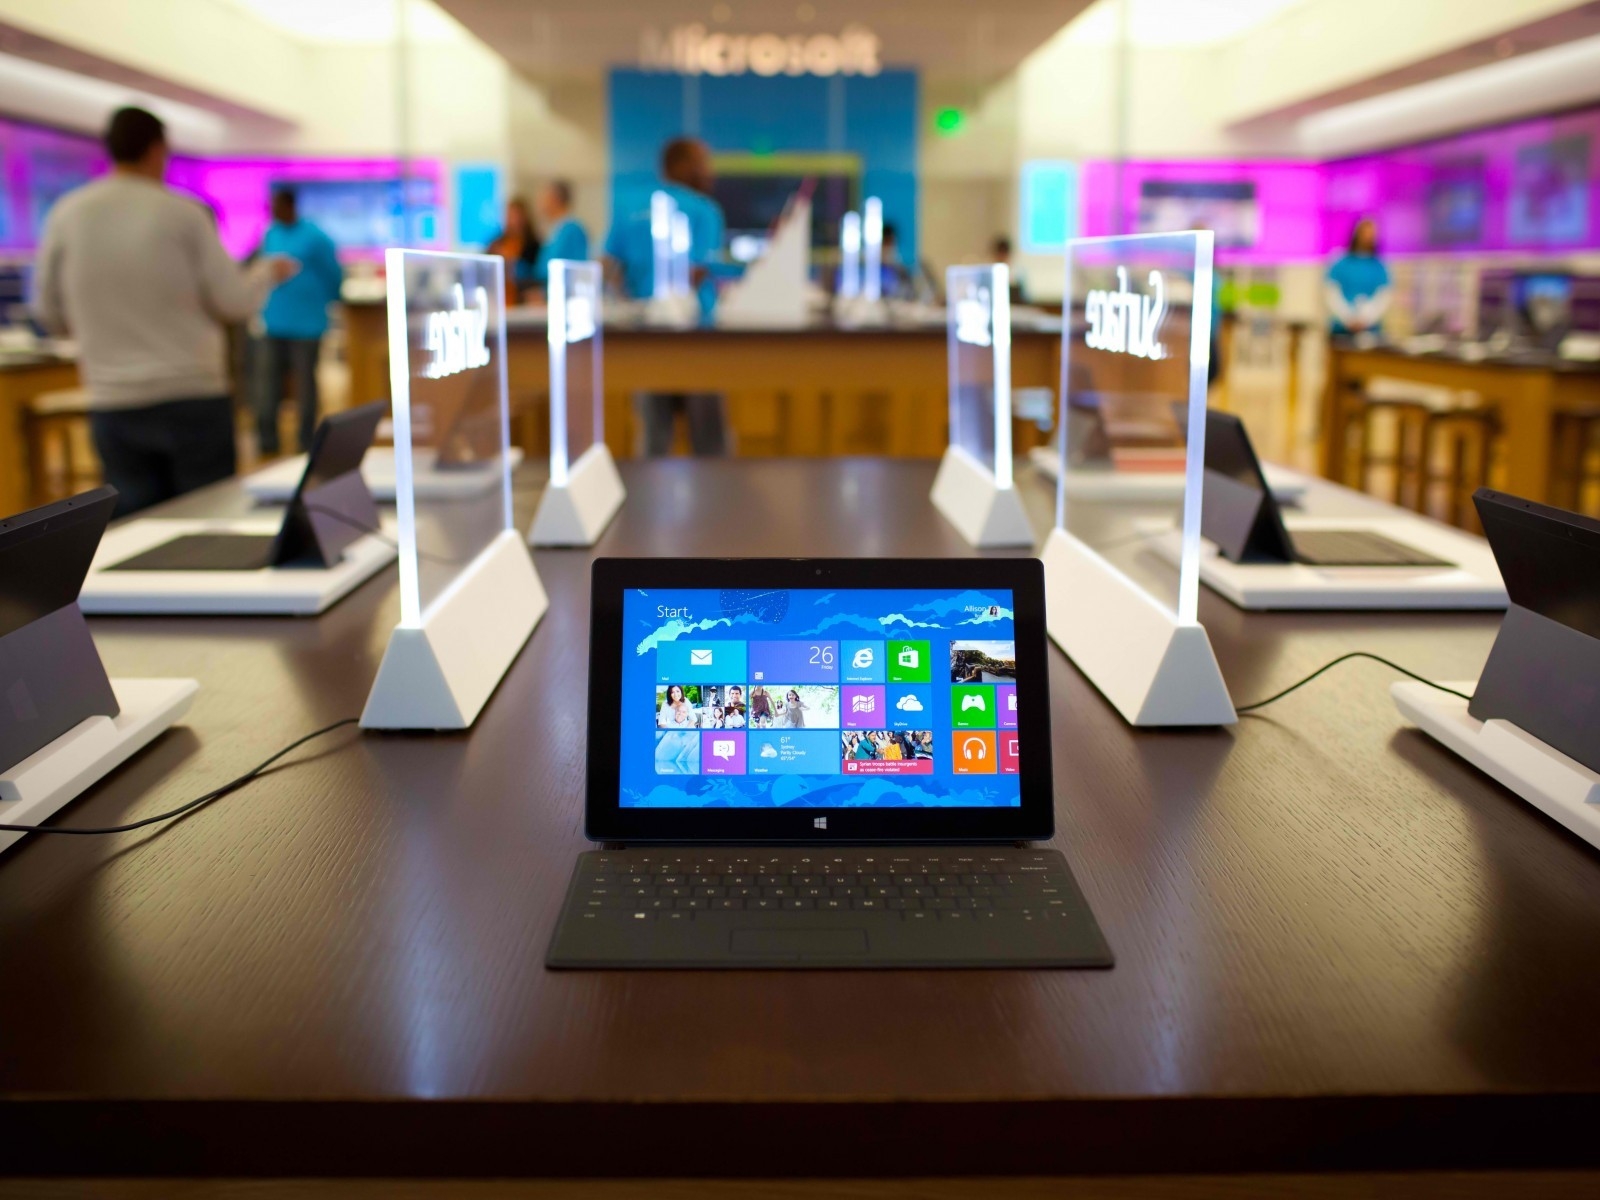 Microsoft Surface Pro Windows 8 Tablet for 1600 x 1200 resolution